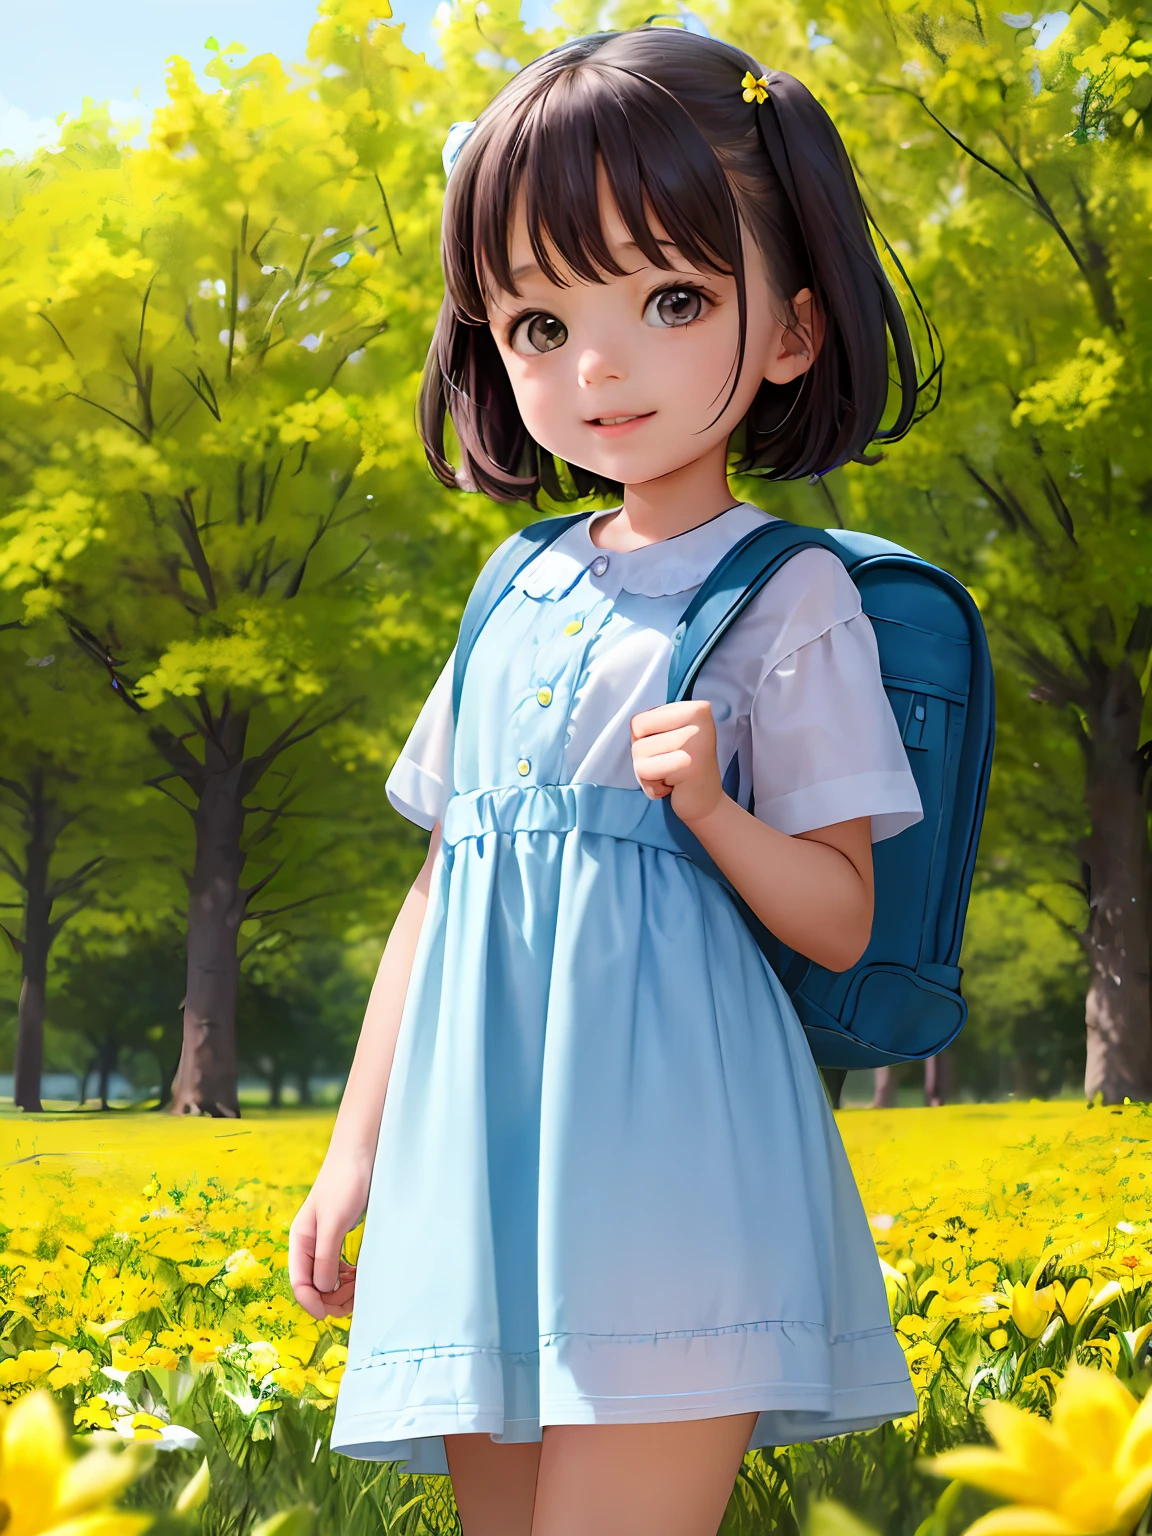 A very charming  with a backpack and her cute puppy enjoying a lovely spring outing surrounded by beautiful yellow flowers and nature. The illustration is a high-definition illustration in 4k resolution, featuring highly detailed facial features and cartoon-style visuals.